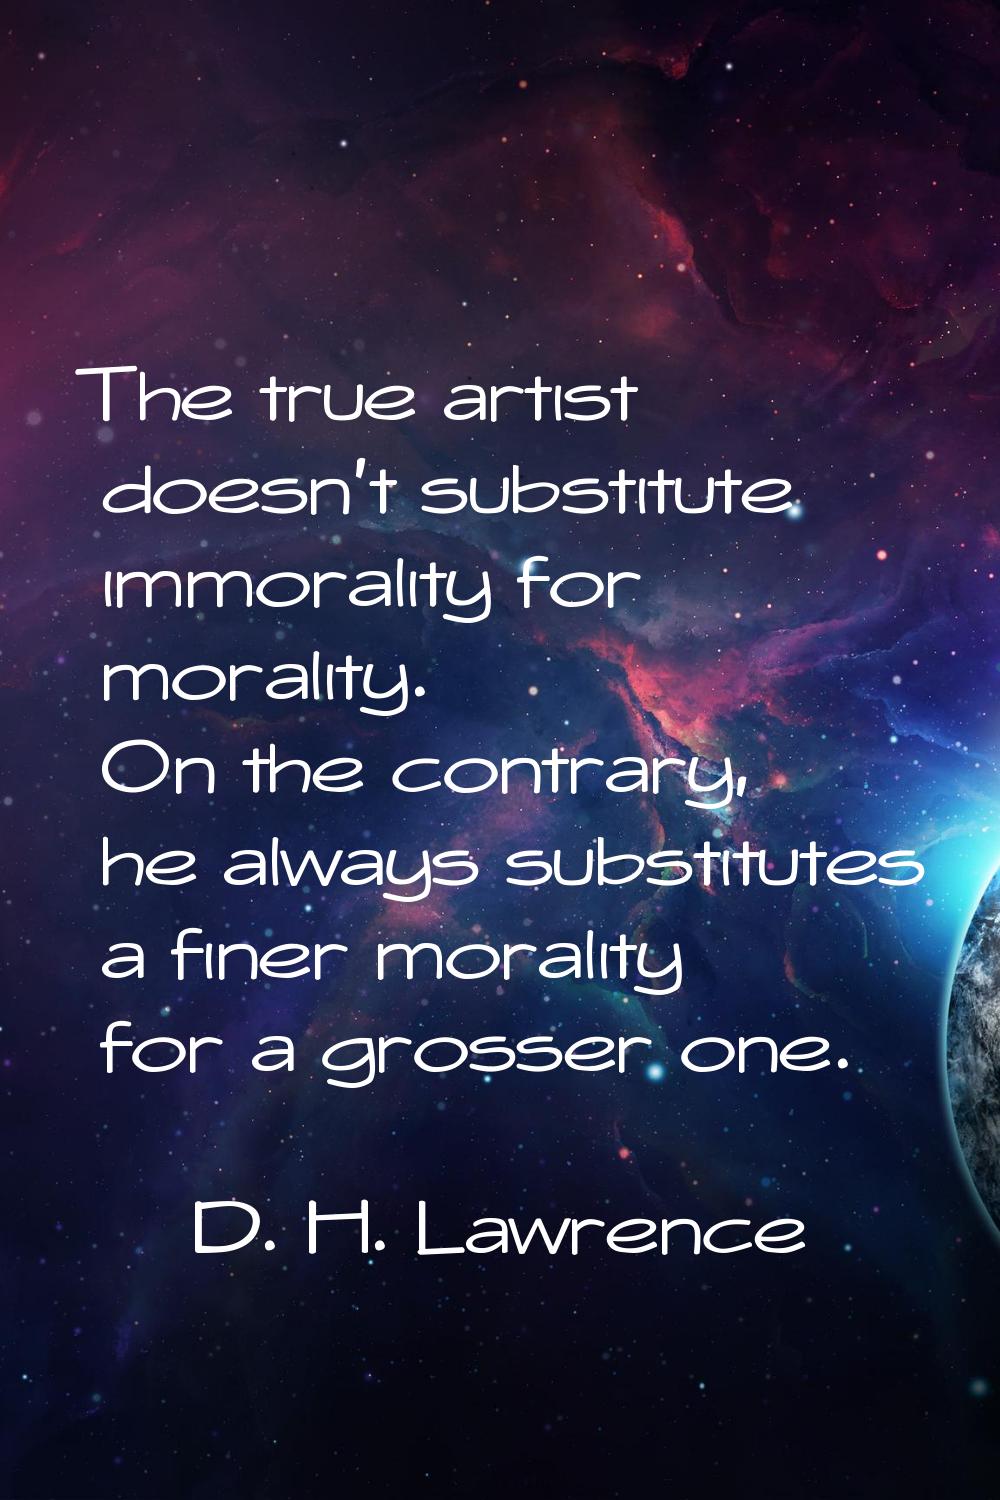 The true artist doesn't substitute immorality for morality. On the contrary, he always substitutes 